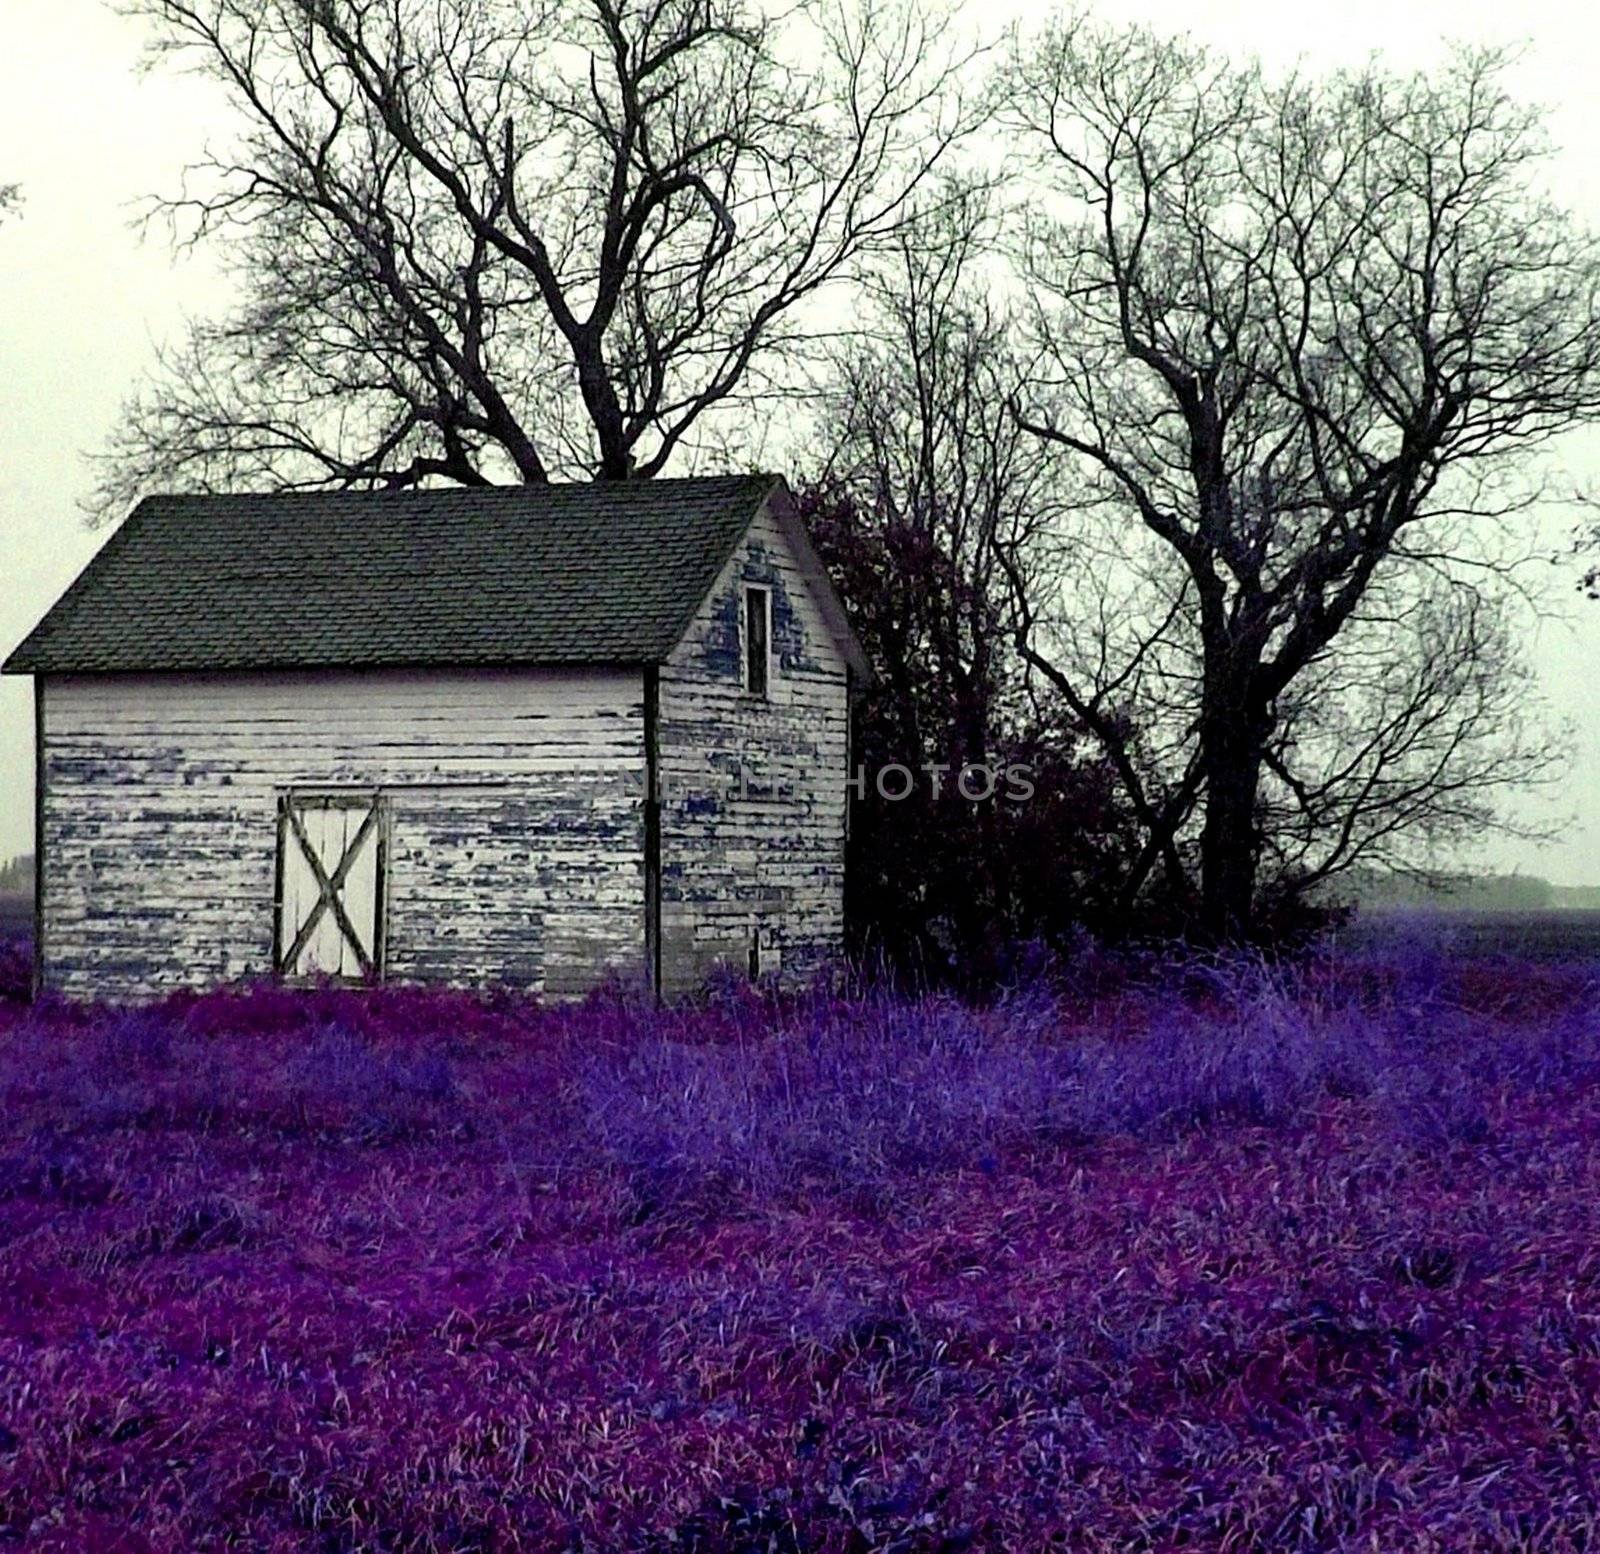 Chicken coop, or old barn, surrounded by purple flora and leafless trees.